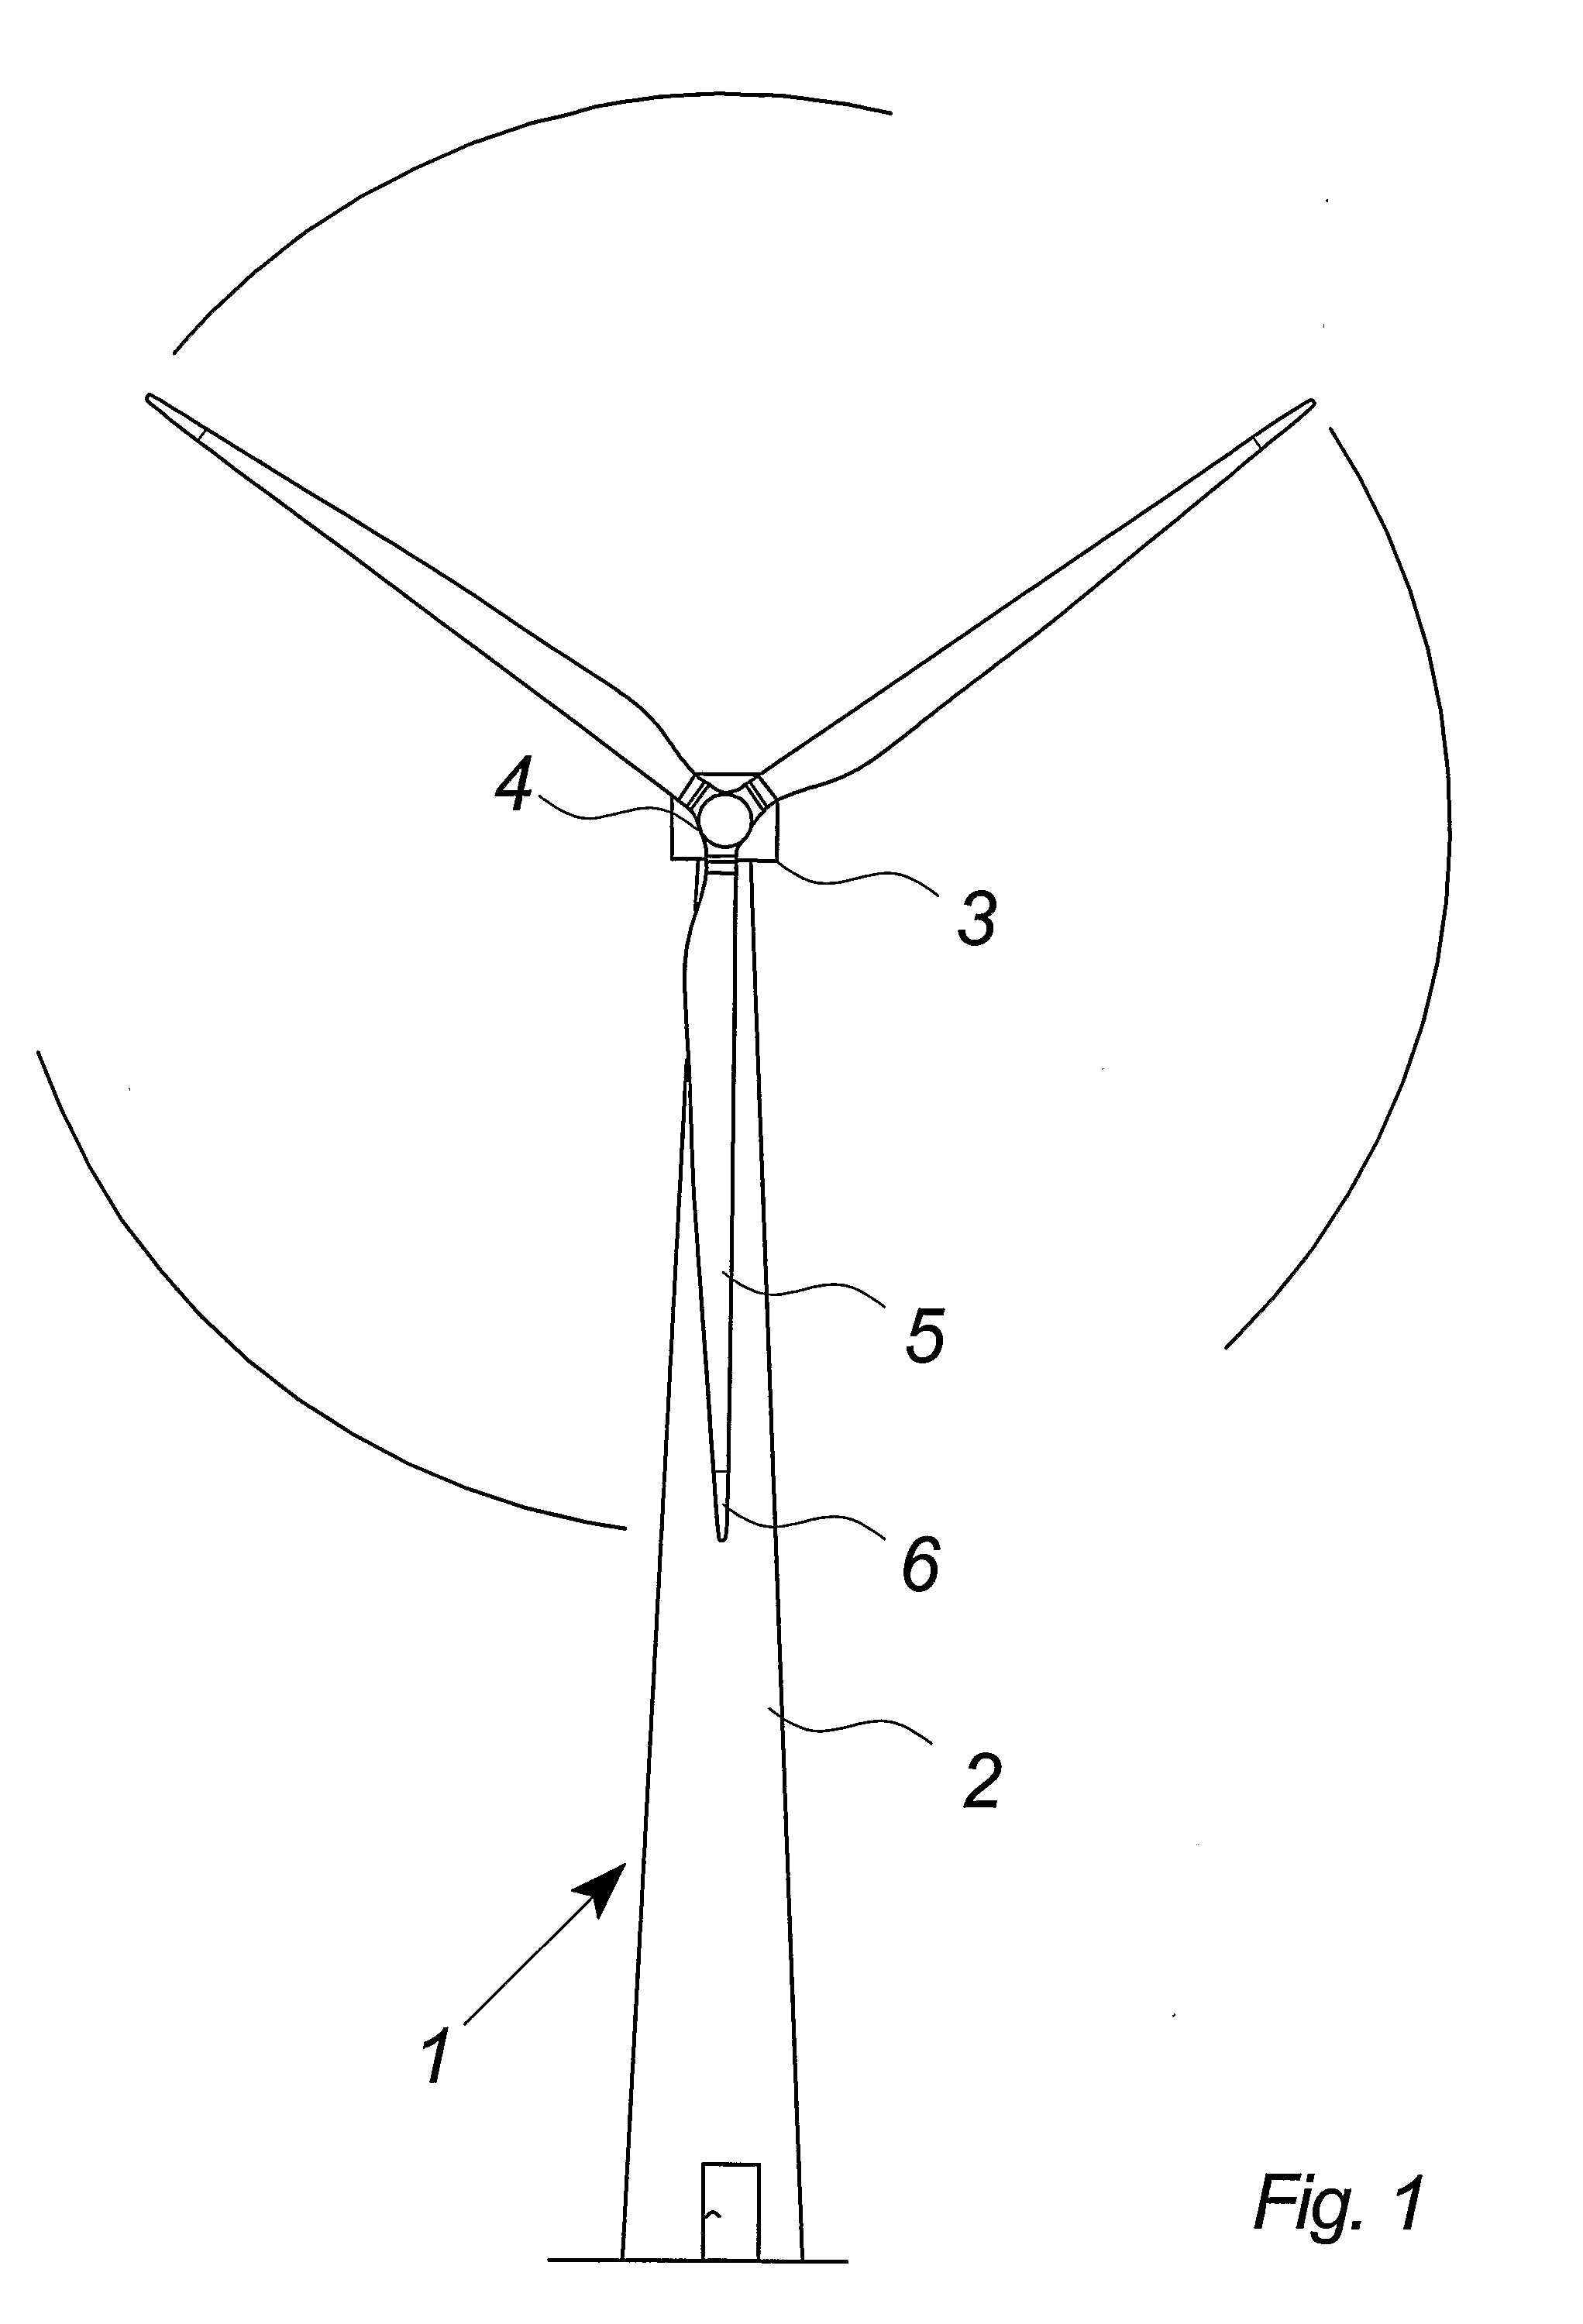 Wind Turbine Lightning Connection Means Method and Use Hereof